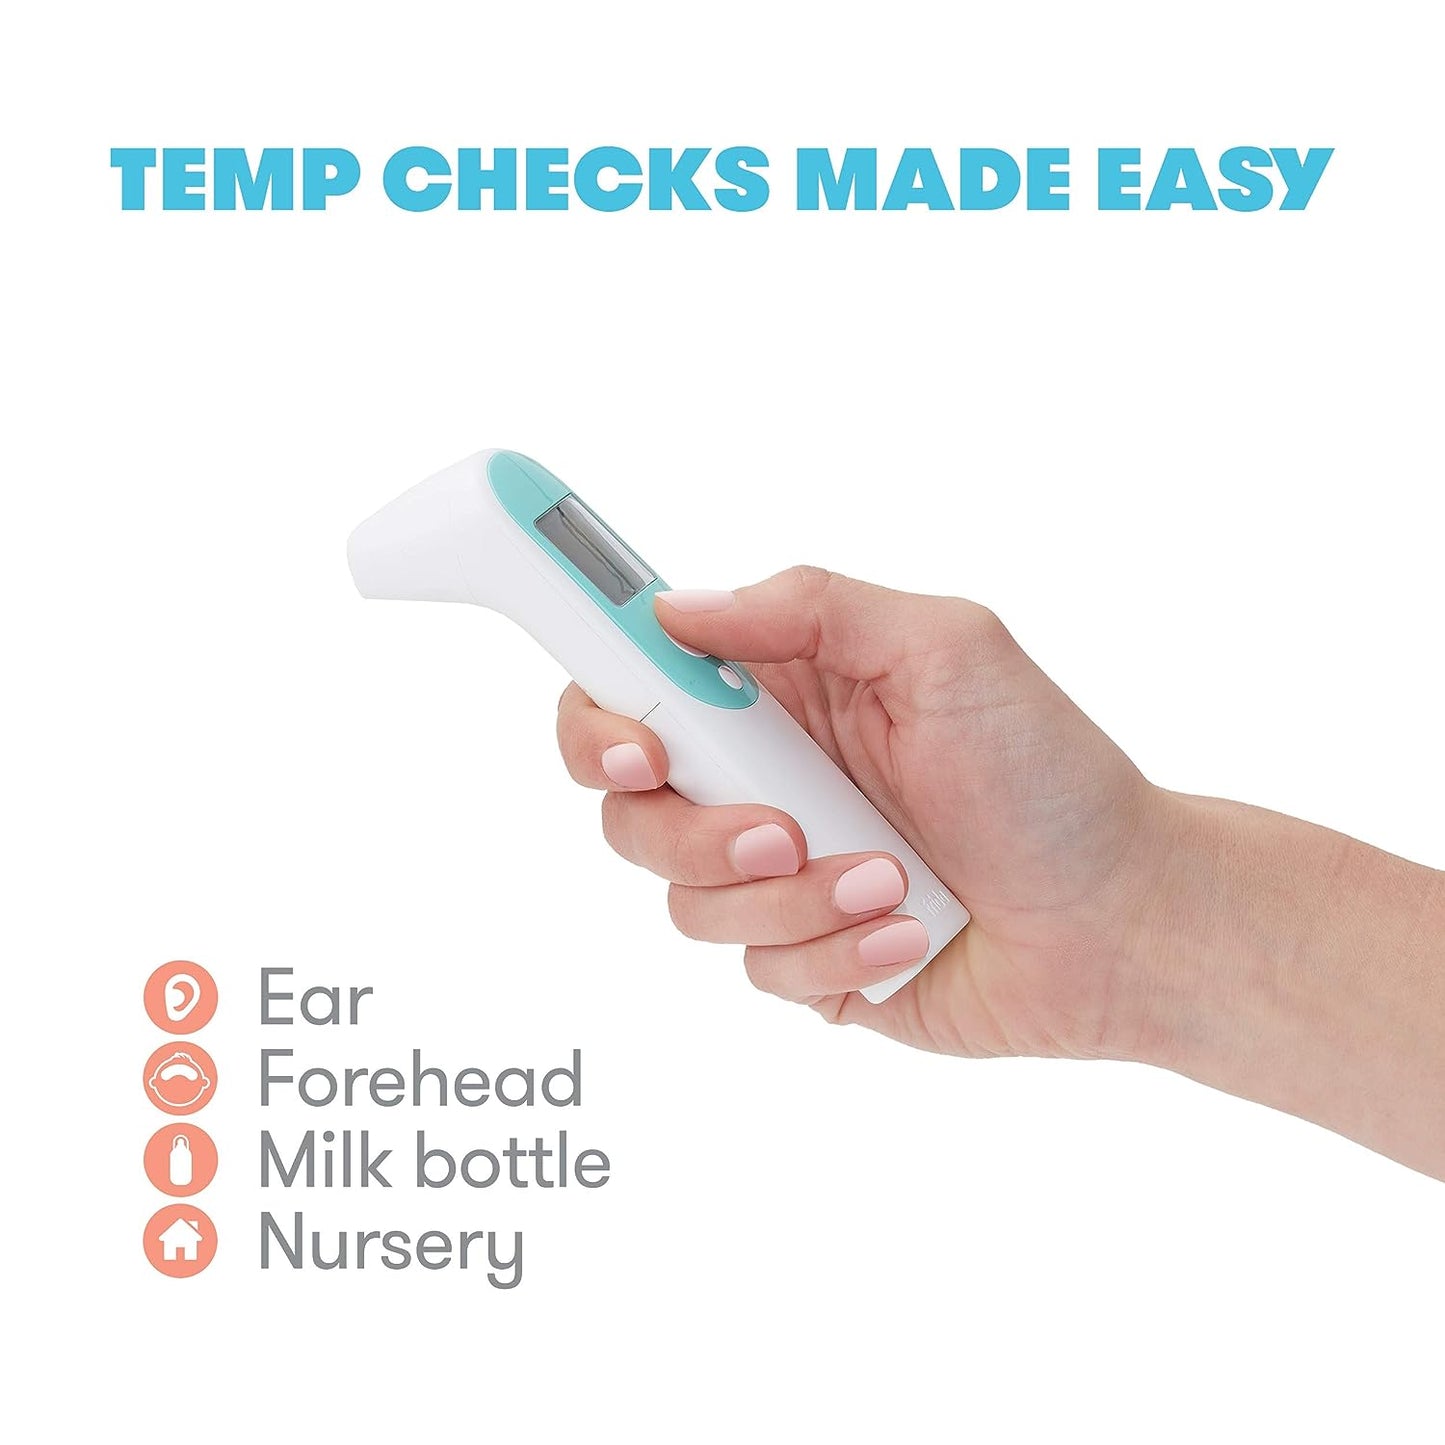 New Frida Baby 3-in-1 Ear, Forehead + Touchless Thermometer